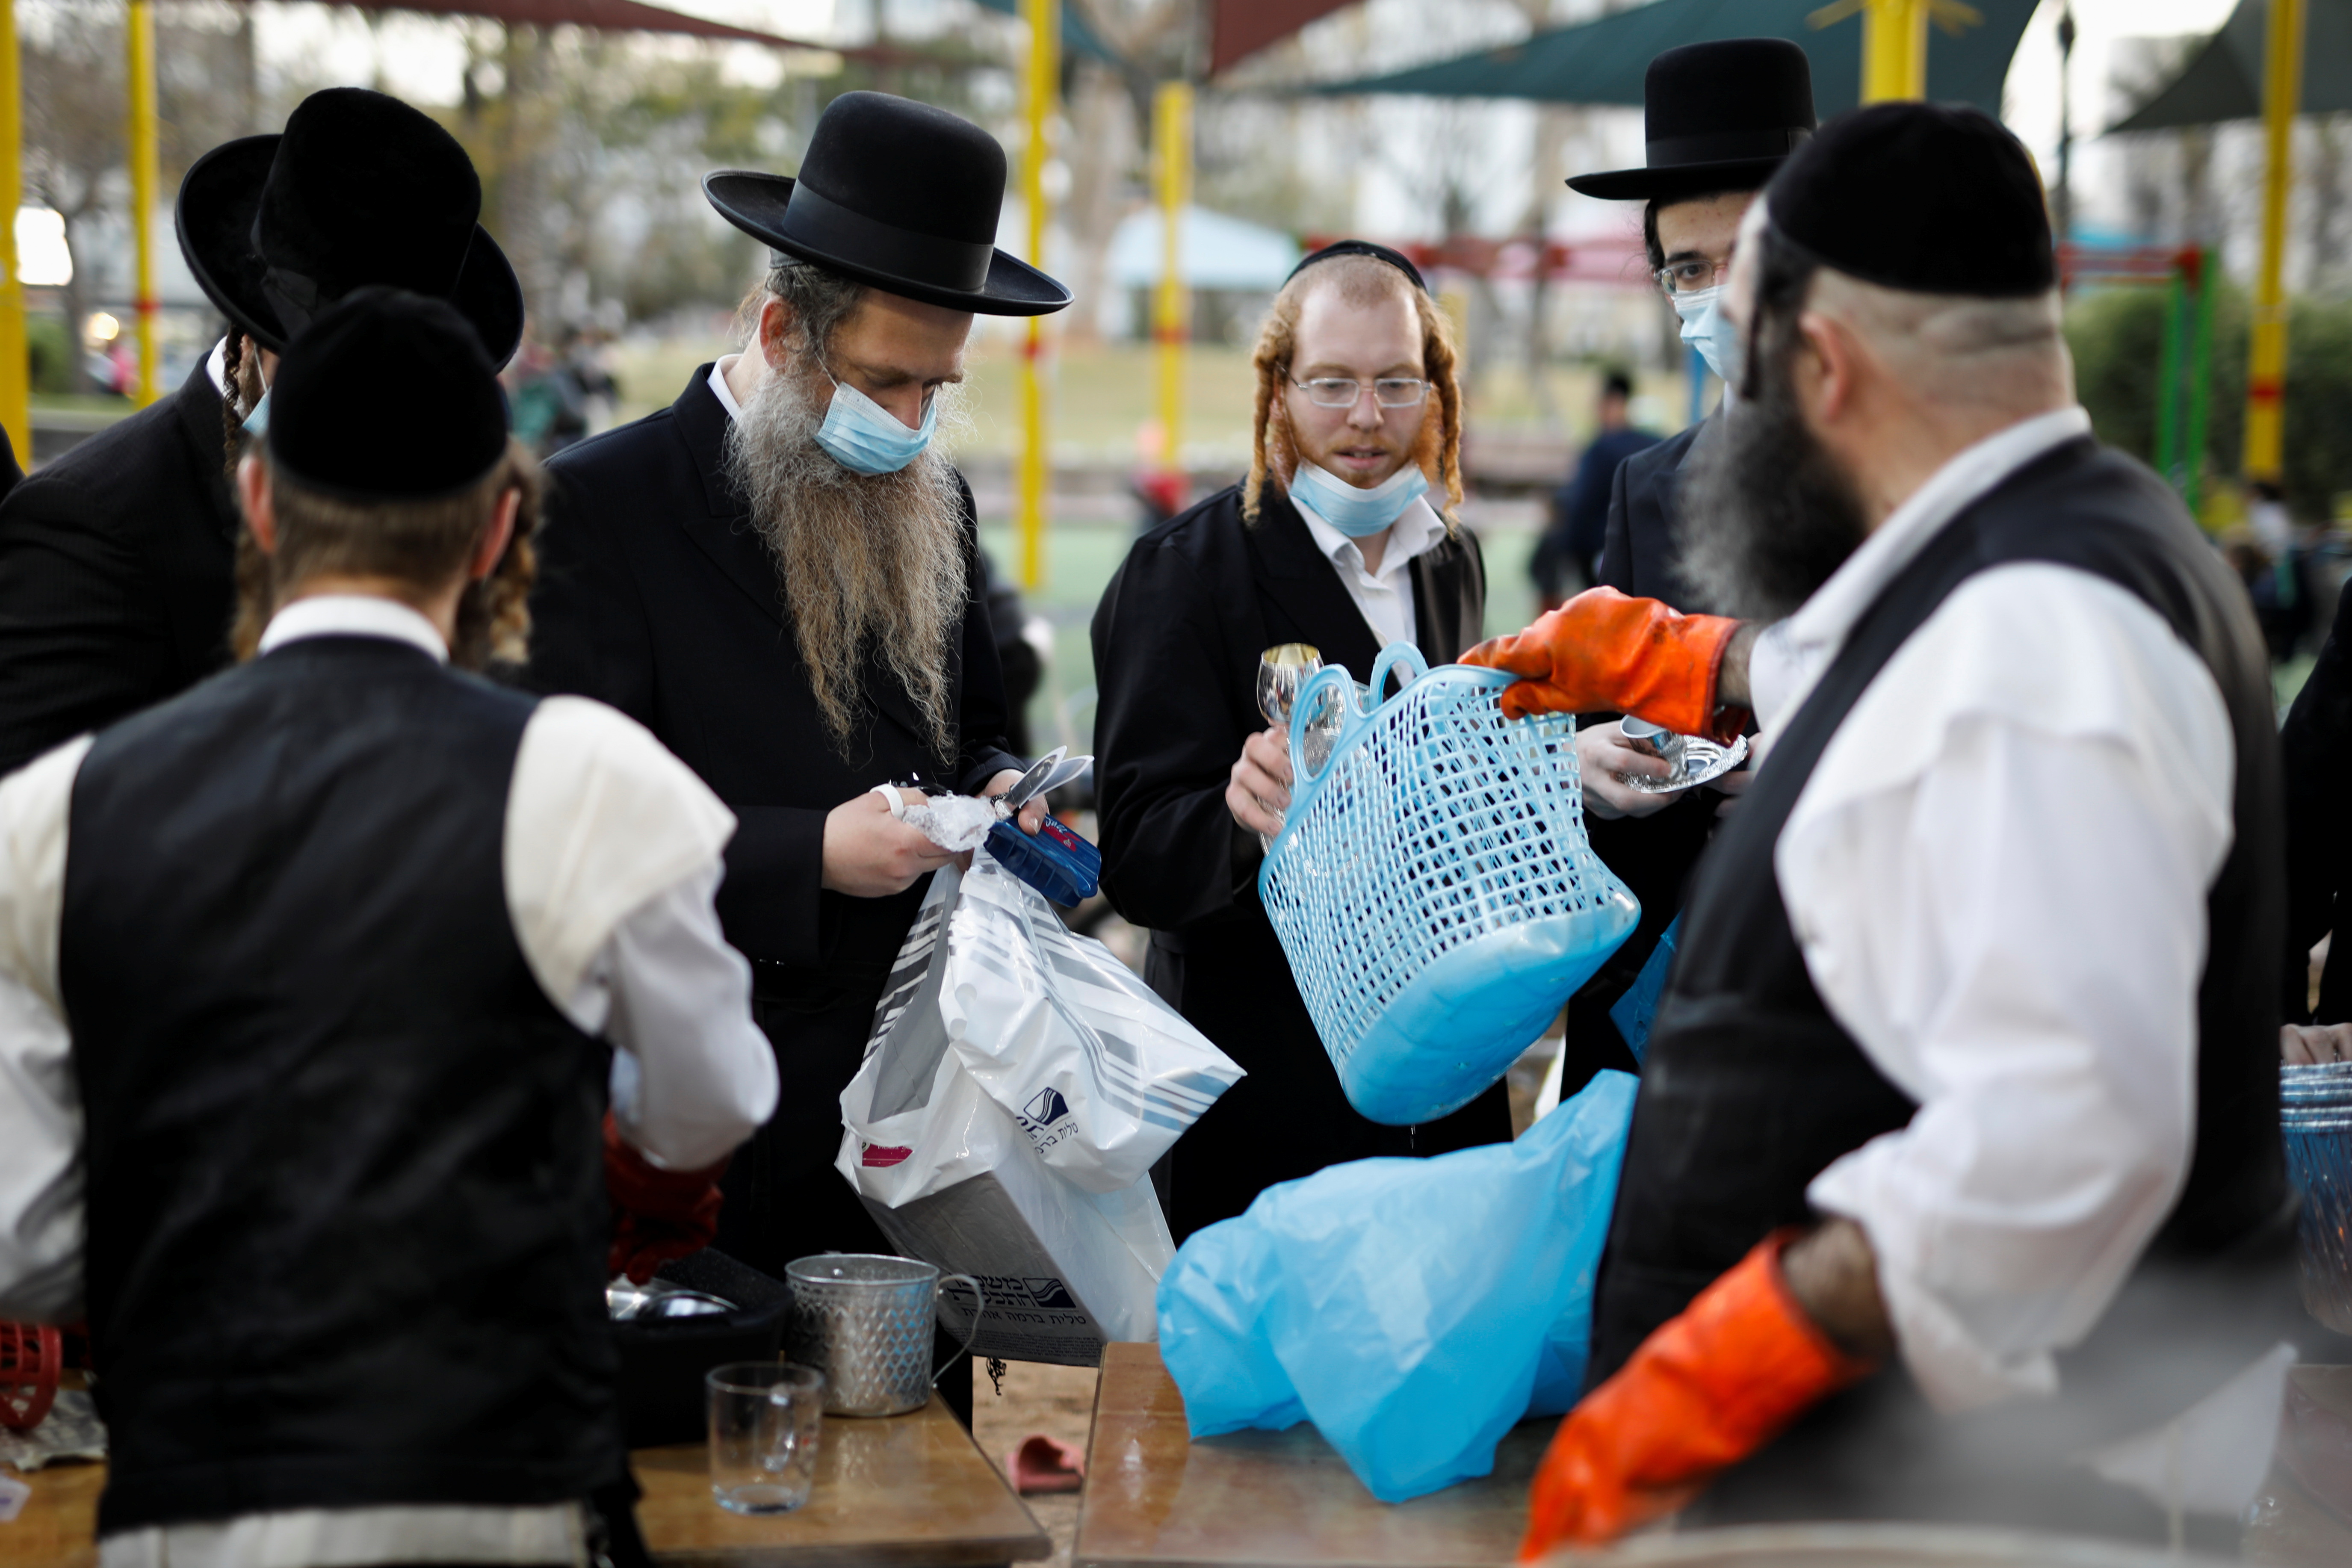 Jews prepare ahead of Passover as Israel begins to emerge from COVID-19 pandemic closures